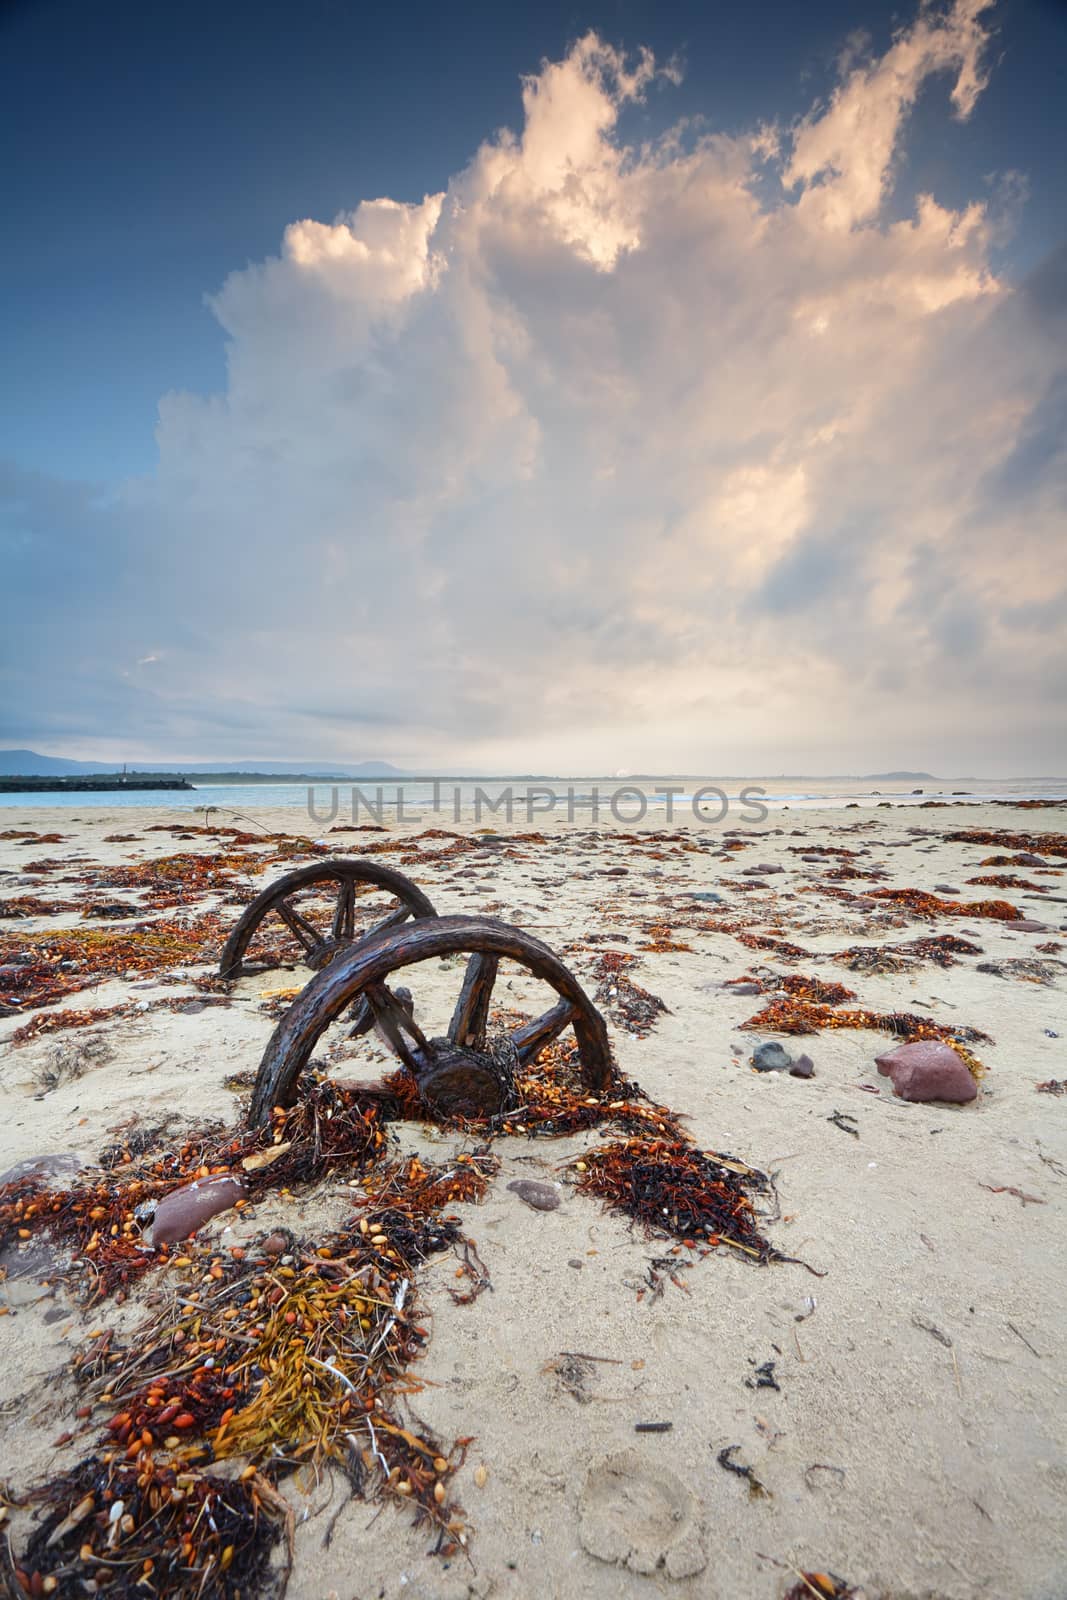 Rusty wheels in the sand surrounded by colourful weed washed up in  a recent big swell. The wheels are left from a train line that existed to haul cut rock from Windang Island to the mainland to build the breakwaters.
